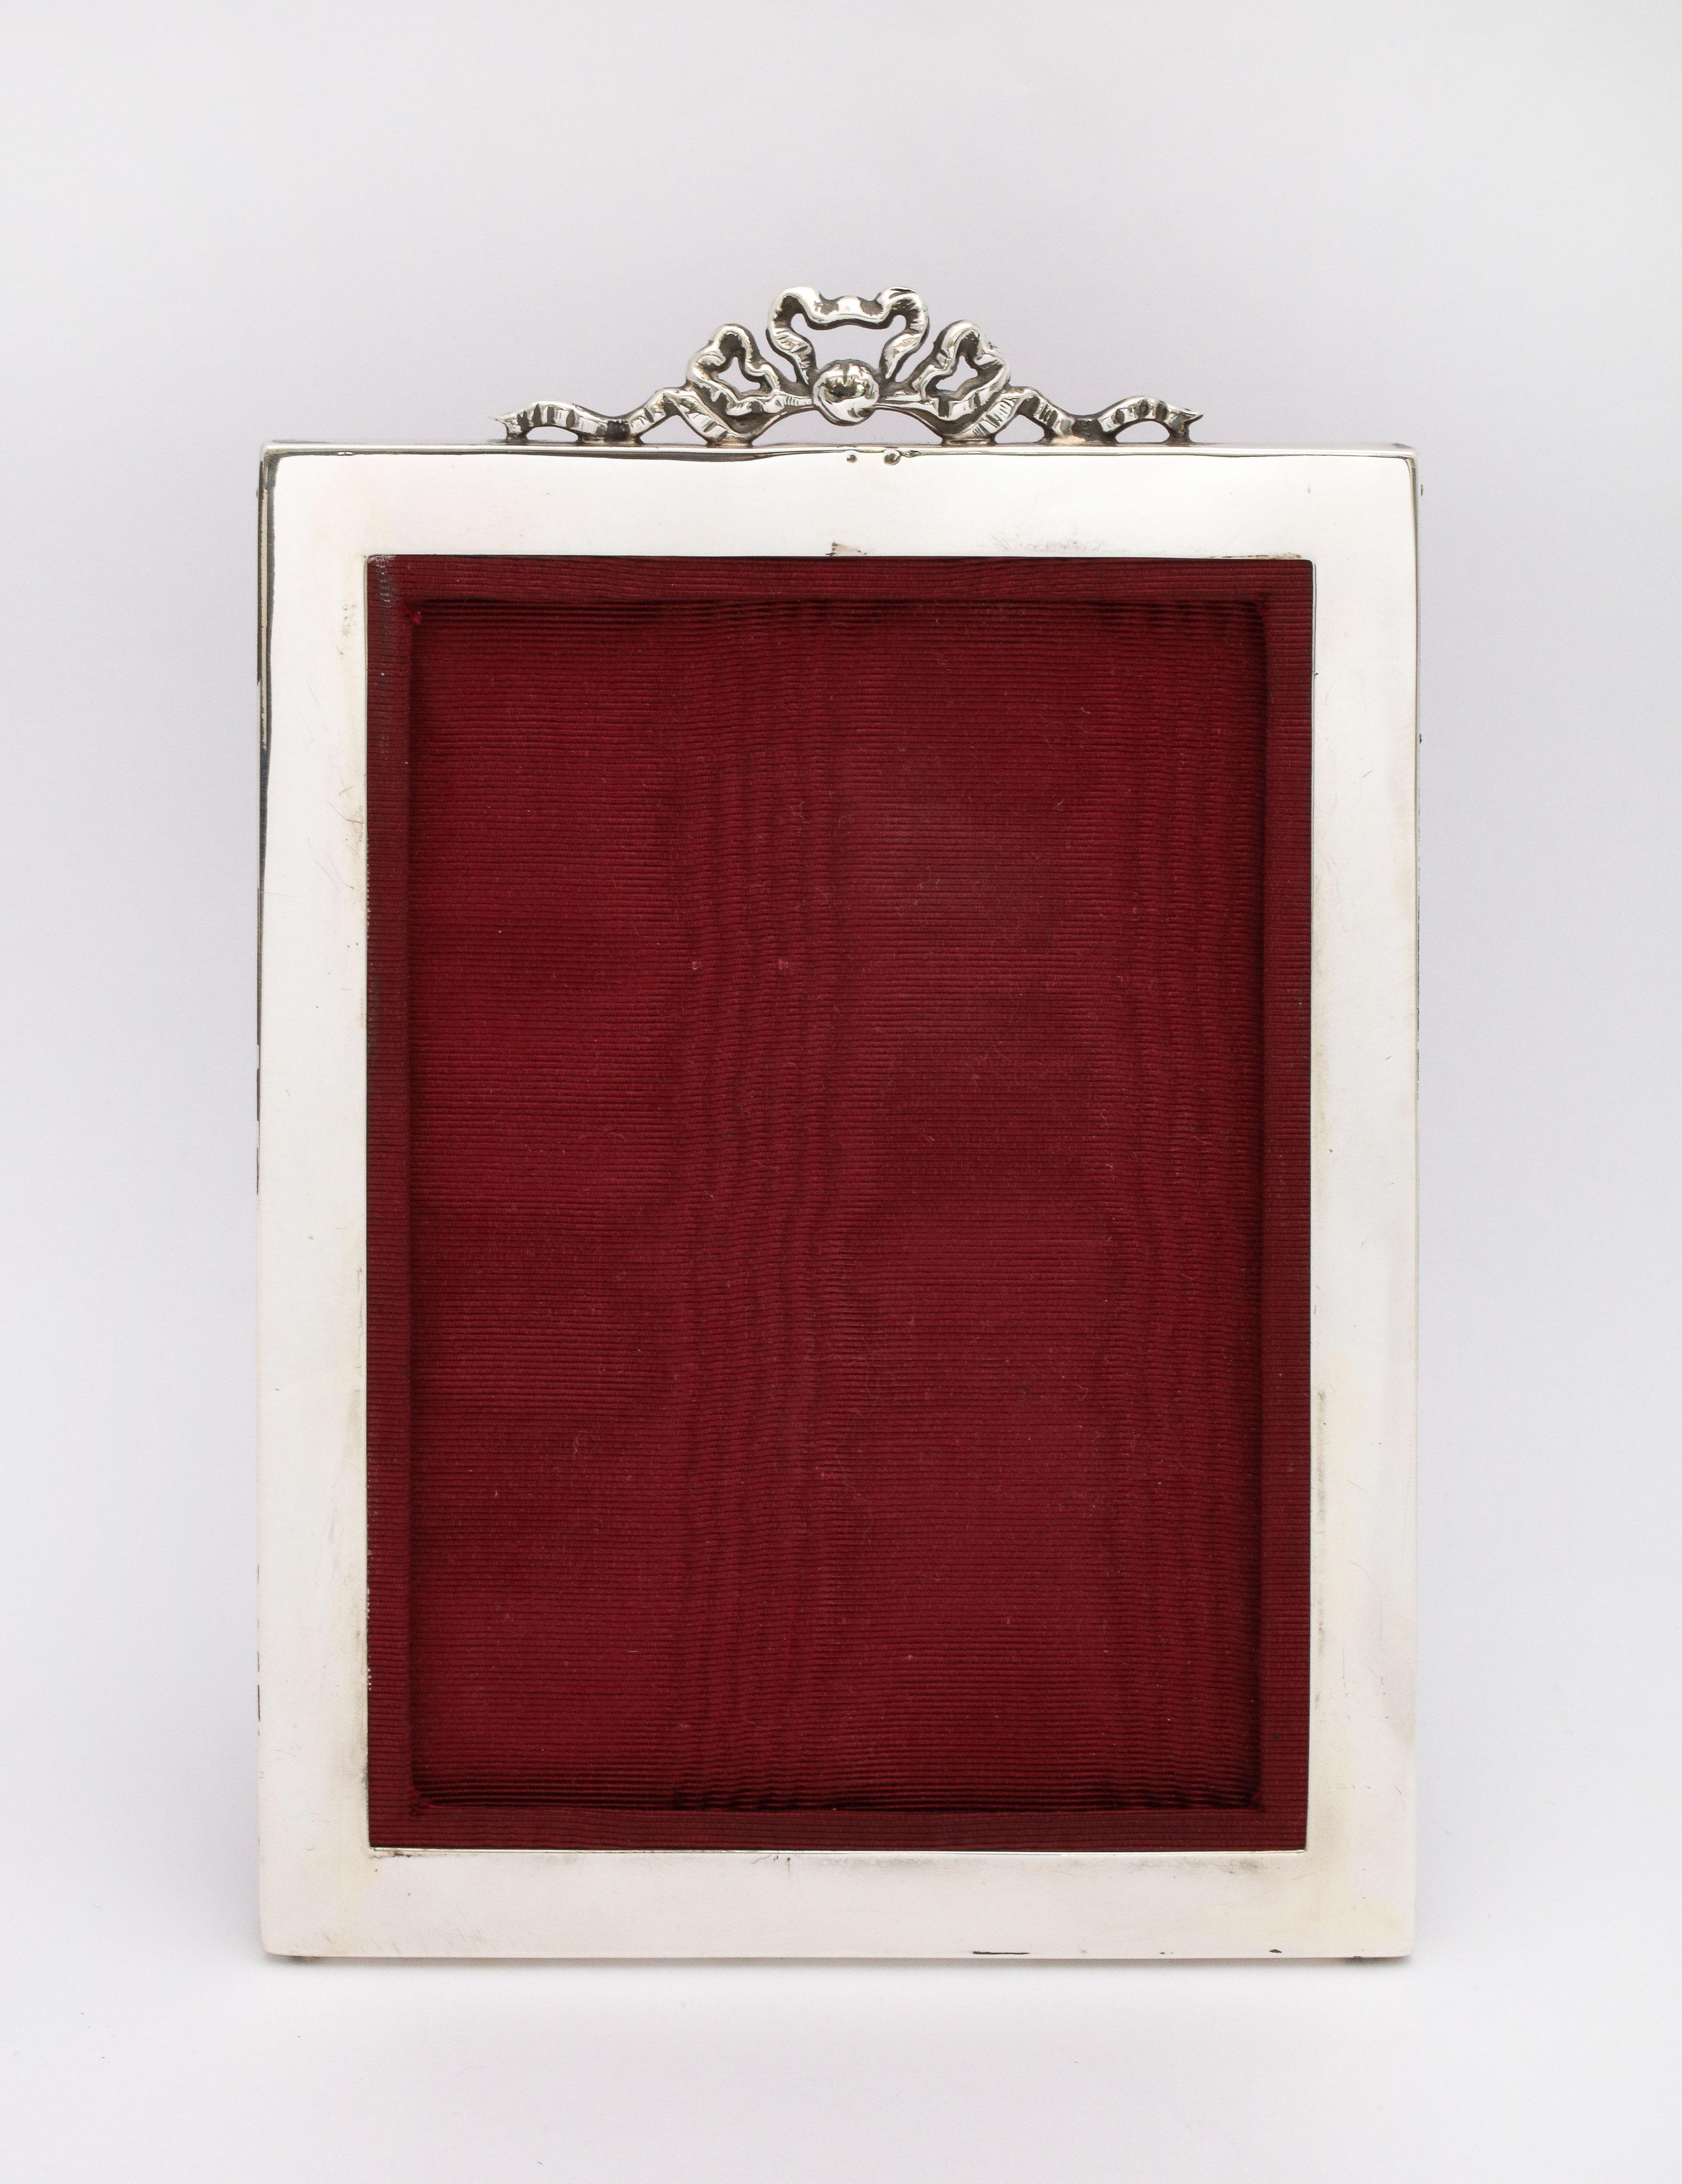 Edwardian, sterling silver picture frame (having a bow finial), Birmingham, England, year-hallmarked for 1901, E. Mander and Son, Ltd. - makers. Frame is backed in burgundy moire. Frame measures 7 inches high (at highest point) x 5 inches wide x 4